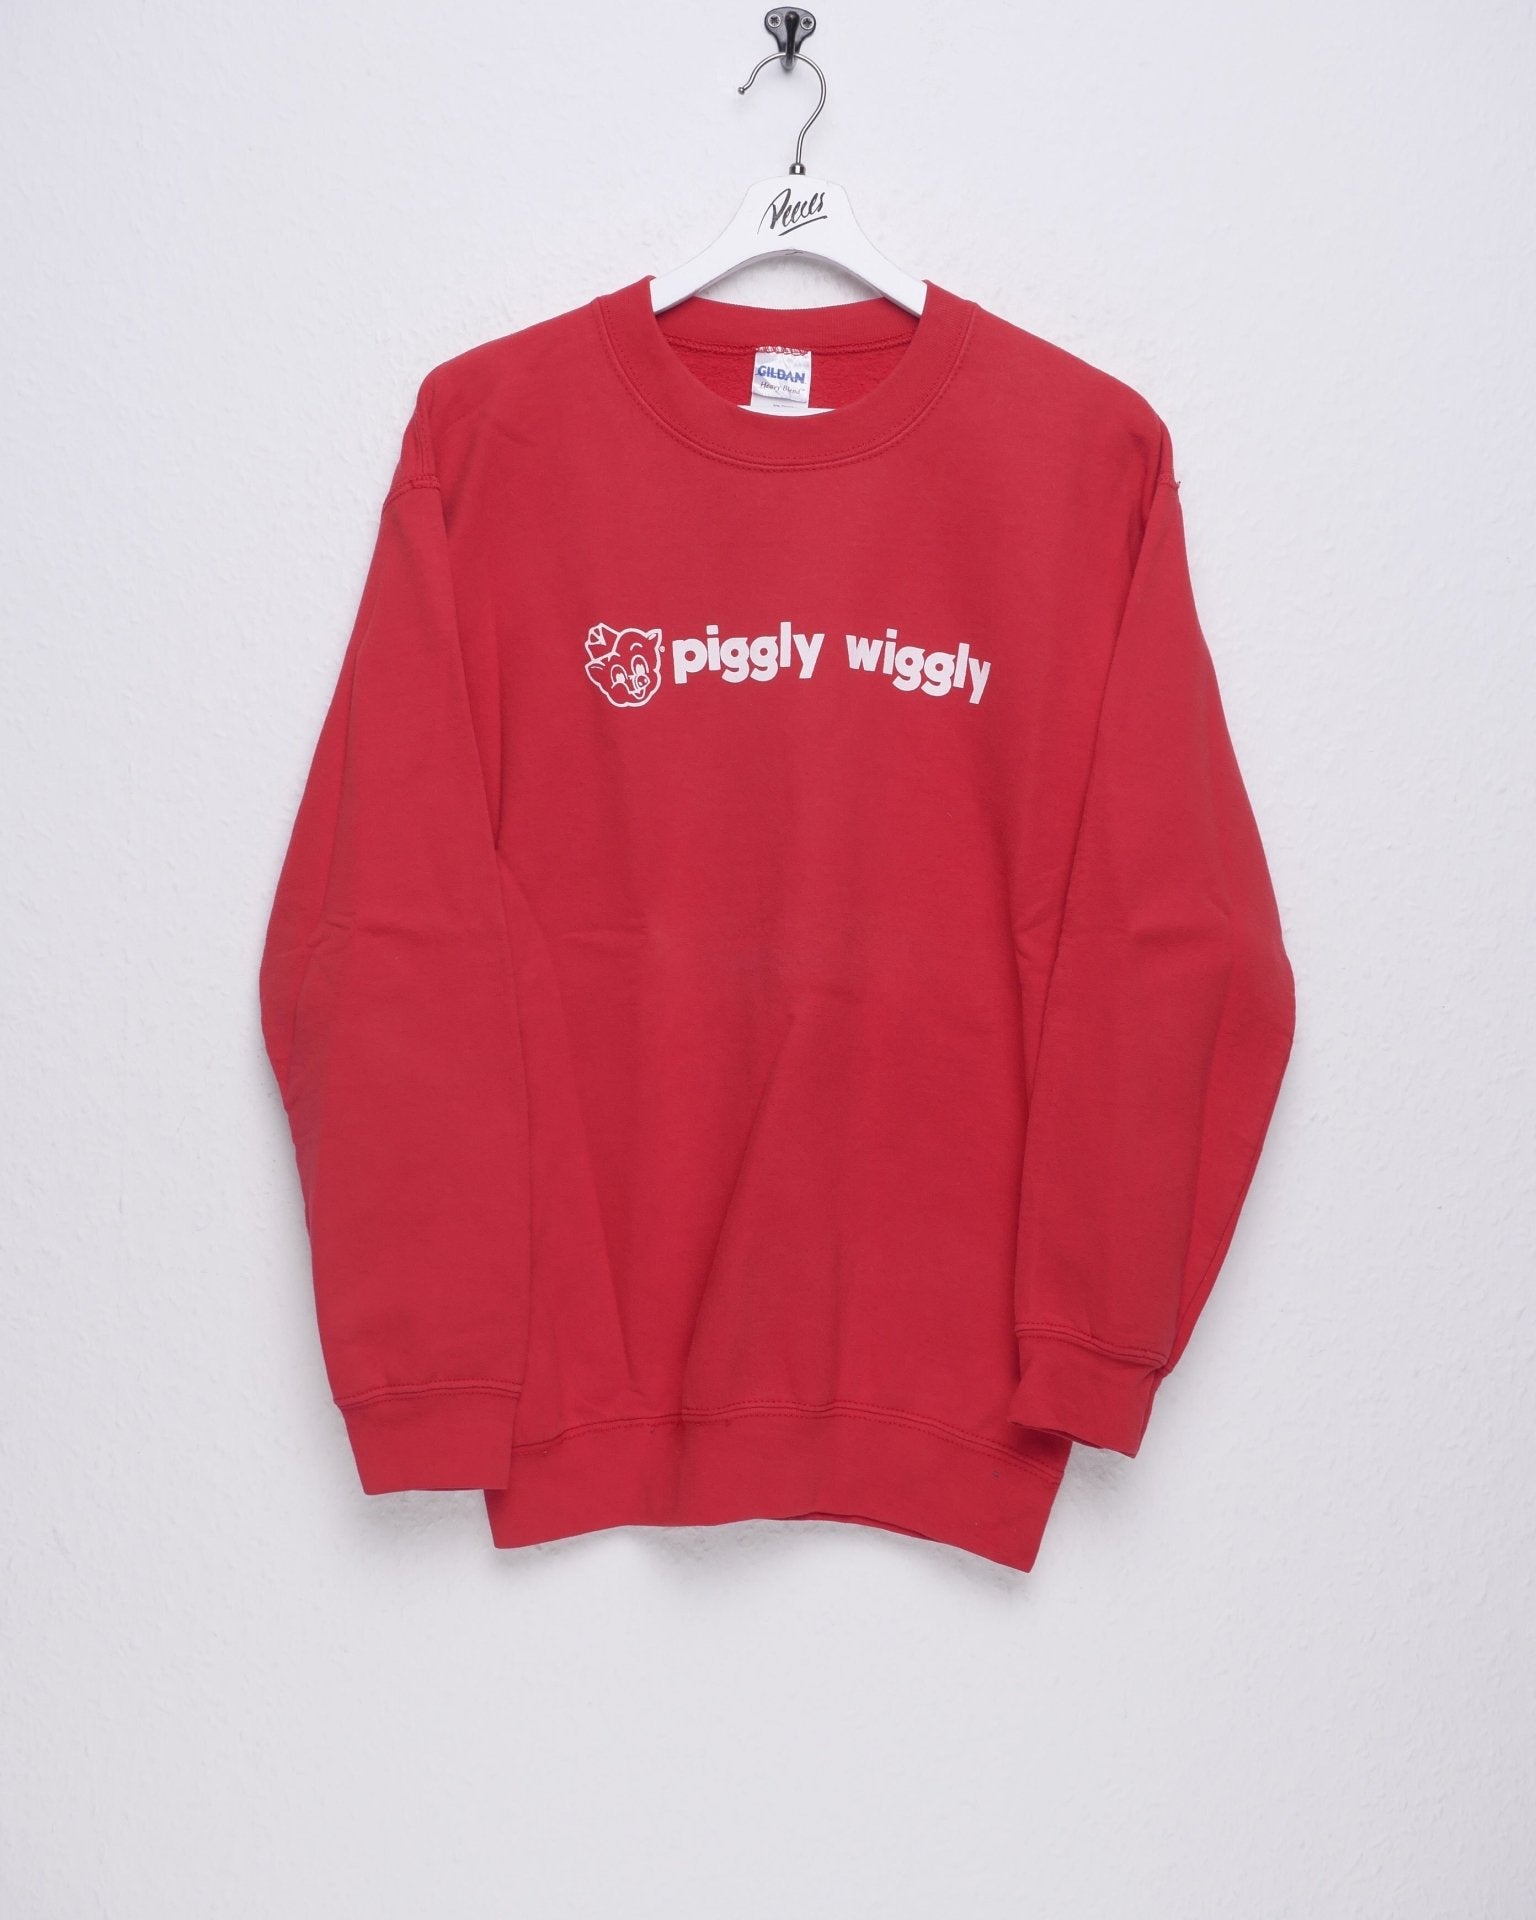 Piggly wiggly printed Logo Sweater - Peeces